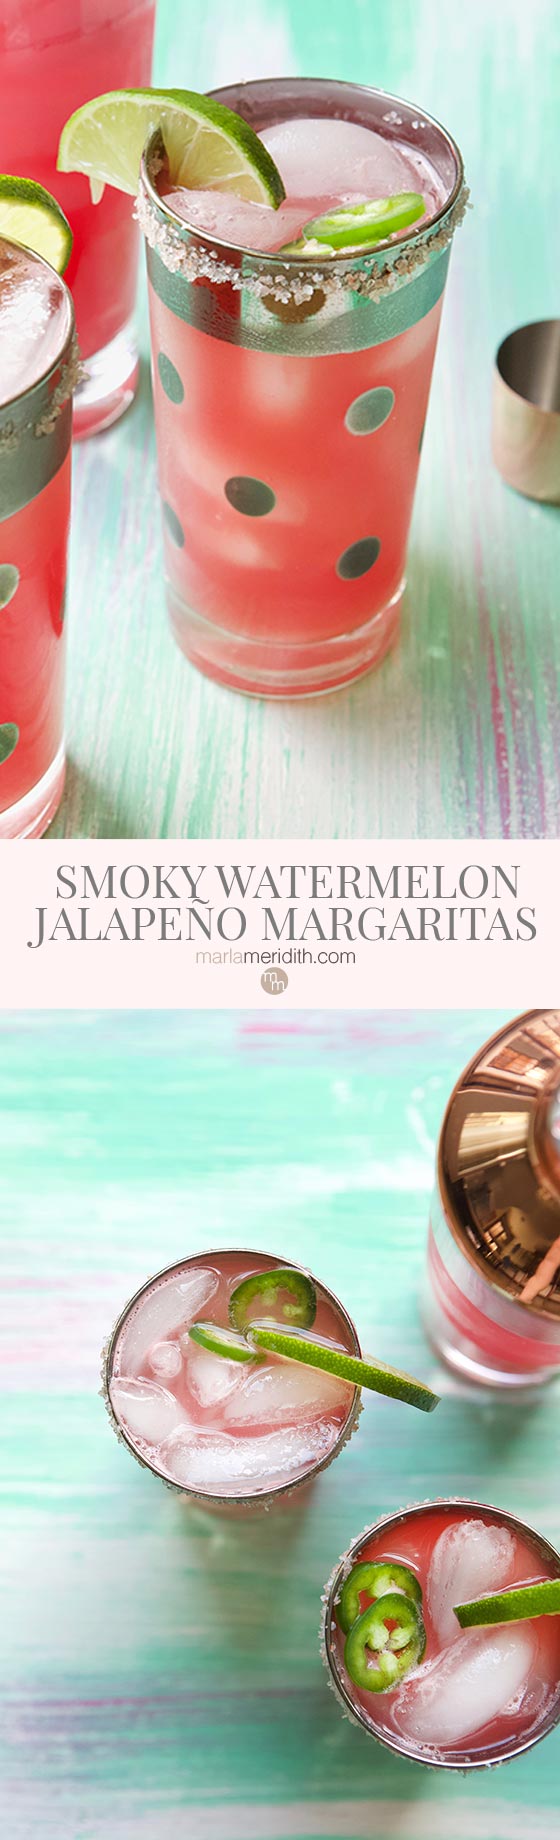 You have gotta try these deliciously, refreshing Smoky Watermelon Jalapeño Margaritas! Get the recipe on MarlaMeridith.com